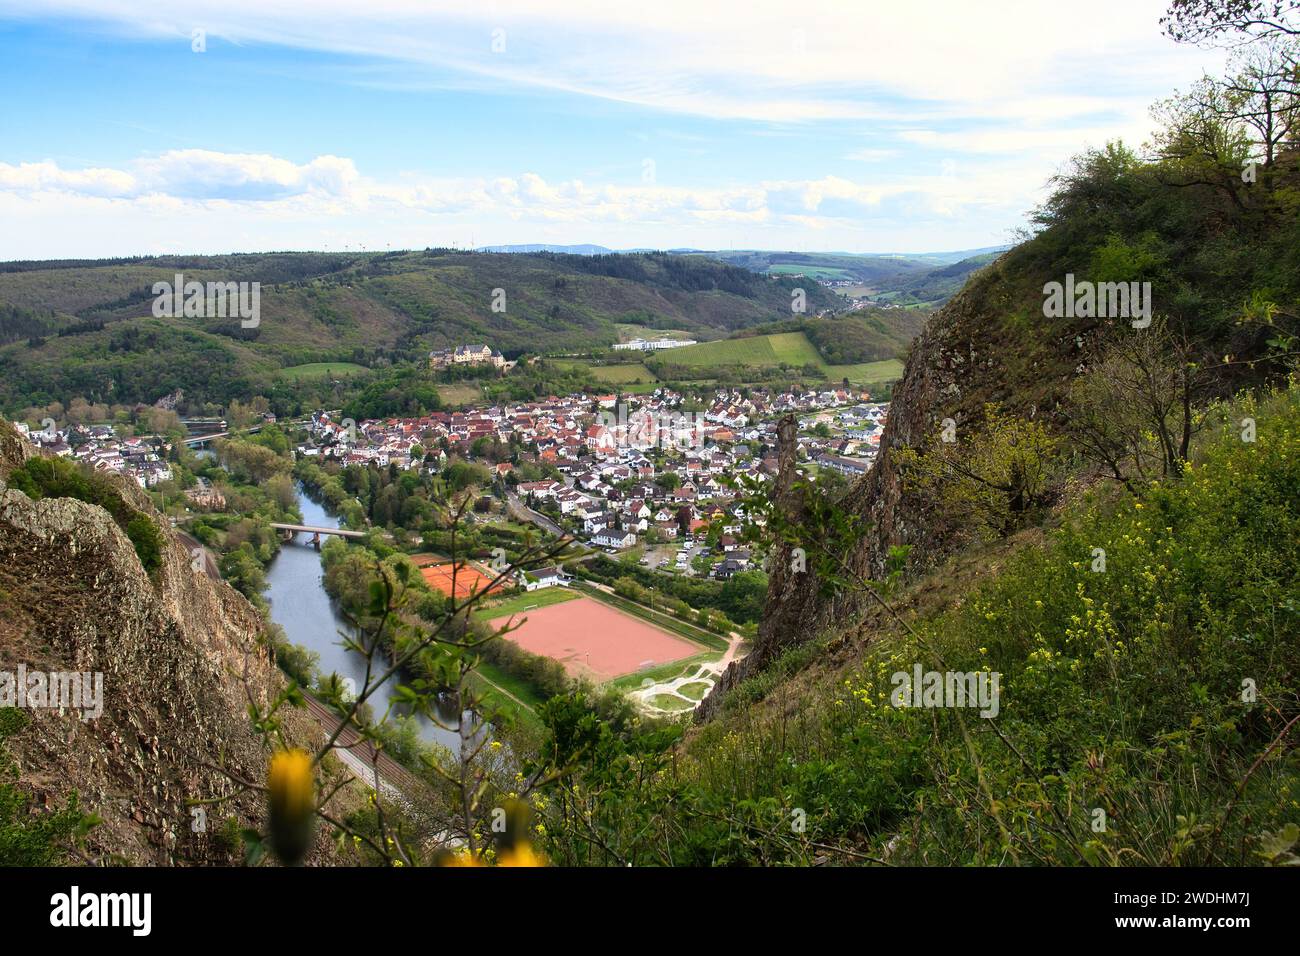 Bad Munster, Germany - May 9, 2021: Aerial view from the top of Rotenfels overlooking Bad Munster with Ebernburg castle in the distance on a spring da Stock Photo